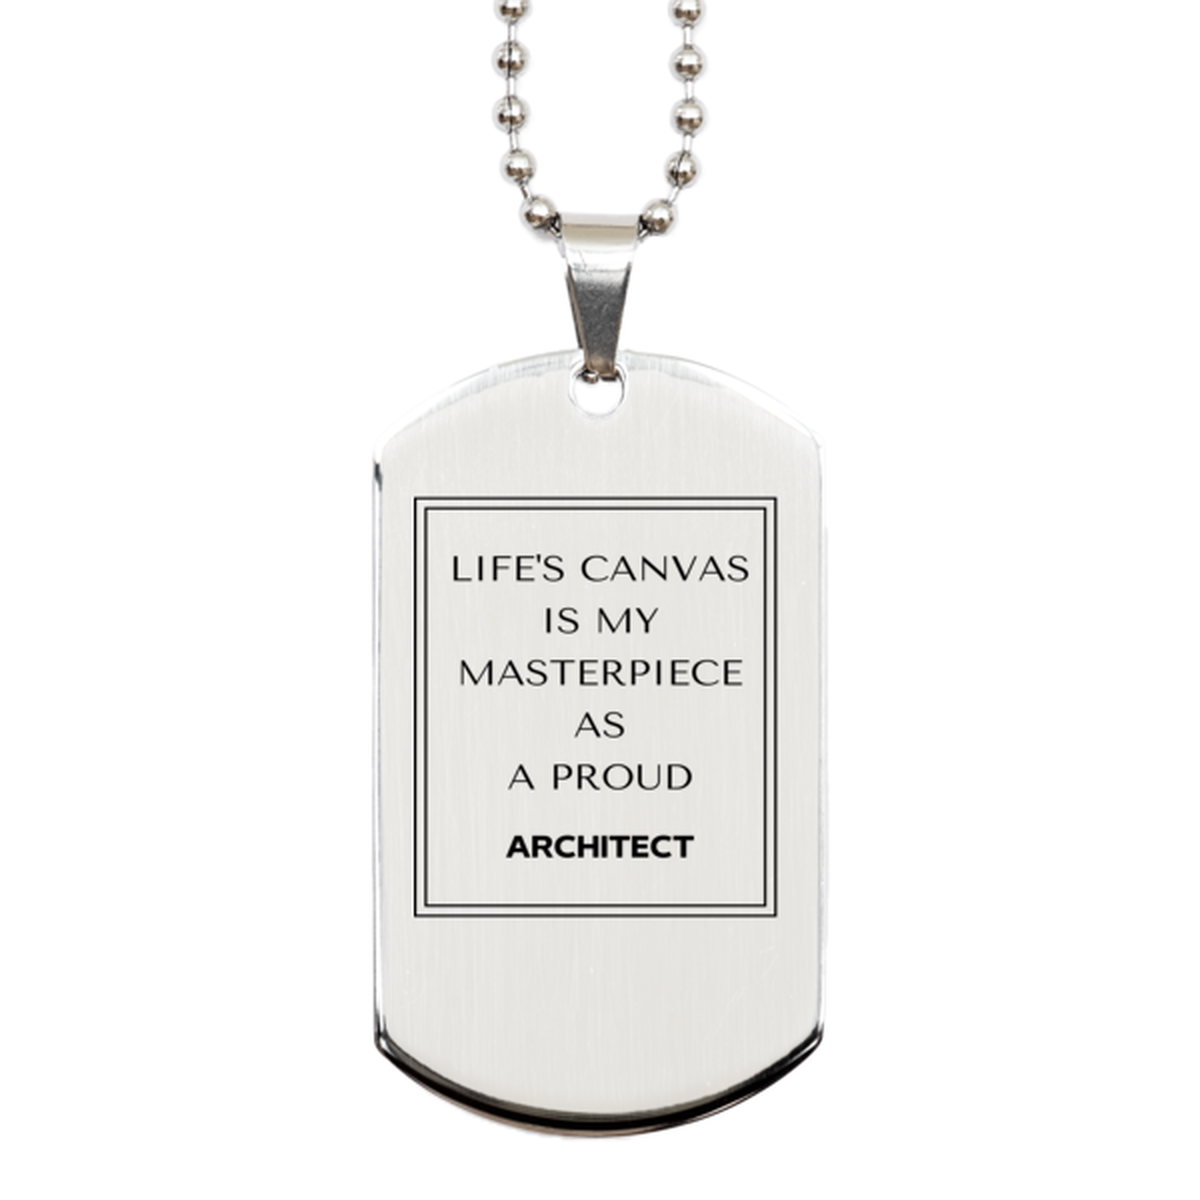 Proud Architect Gifts, Life's canvas is my masterpiece, Epic Birthday Christmas Unique Silver Dog Tag For Architect, Coworkers, Men, Women, Friends